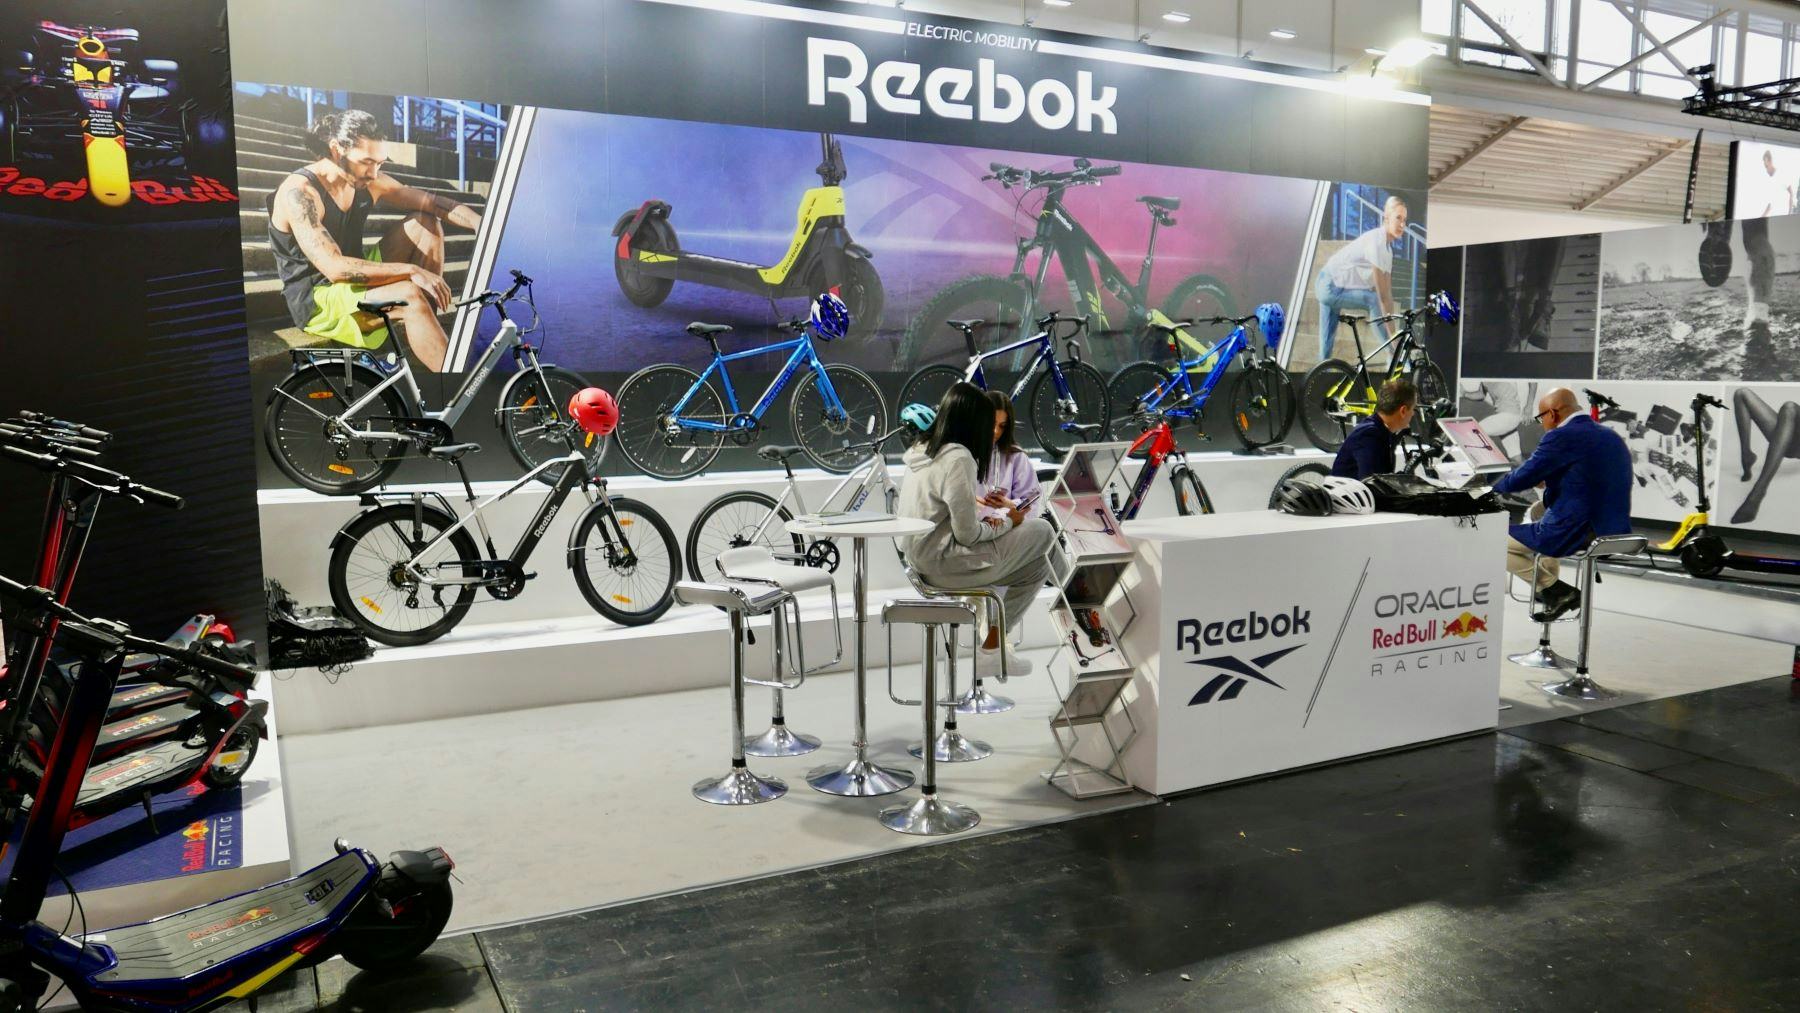 Reebok E-Mobility celebrated its official launch at Ispo Munich with its booth premiere. – Photo Jo Beckendorff